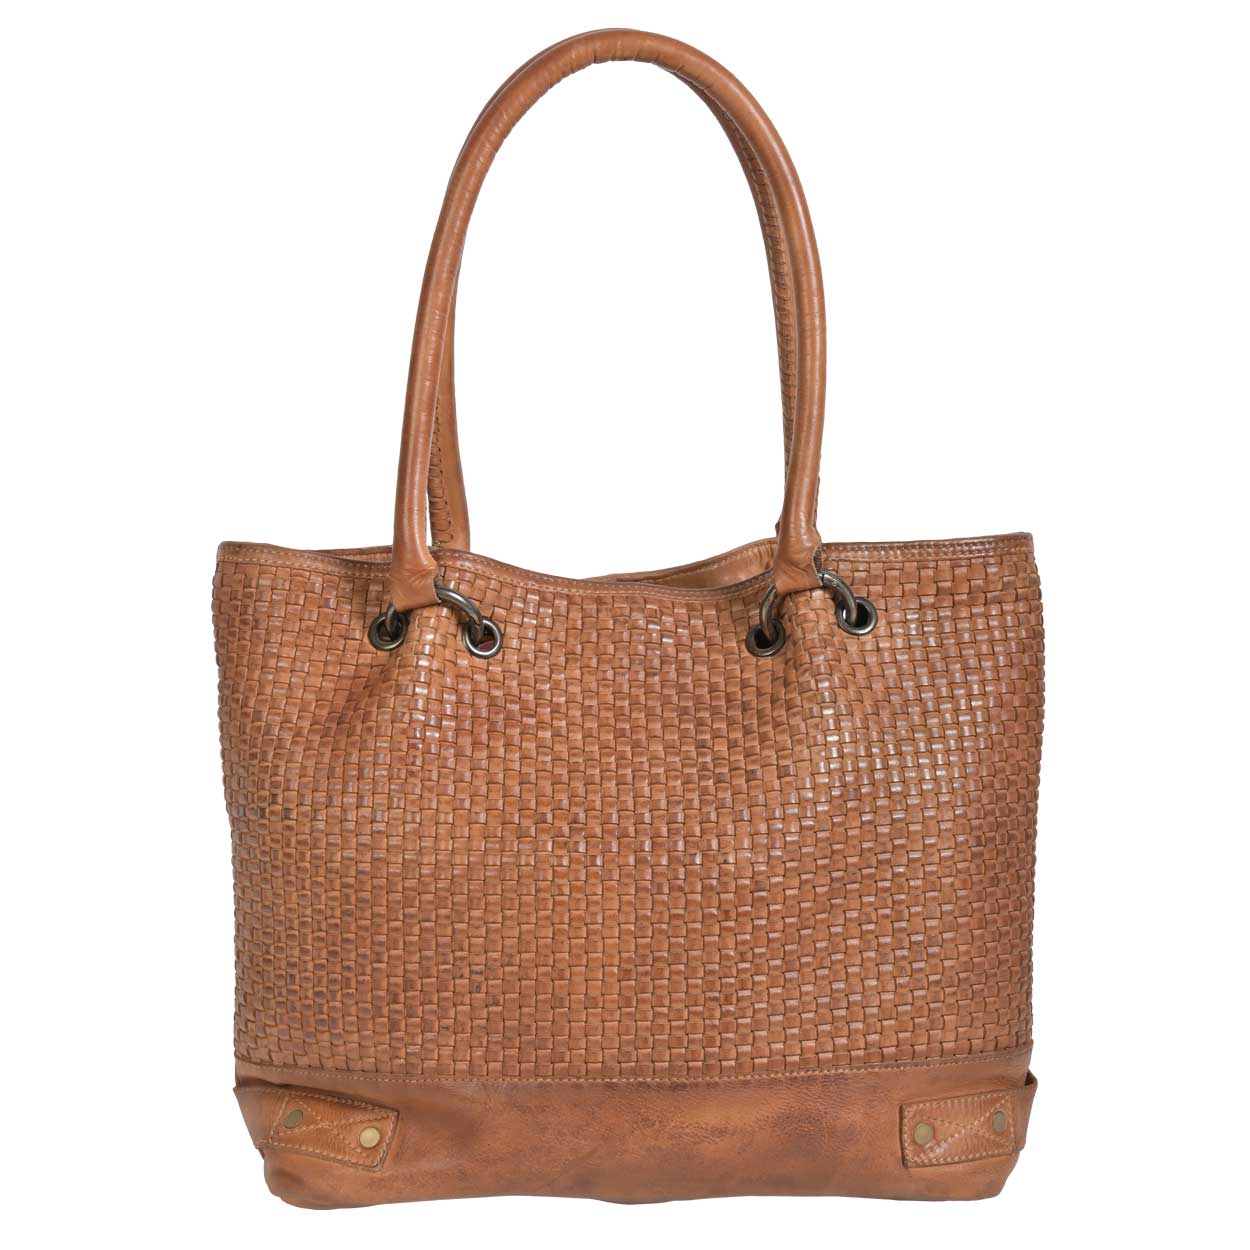 Sweet Grass Woven Leather Tote by STS